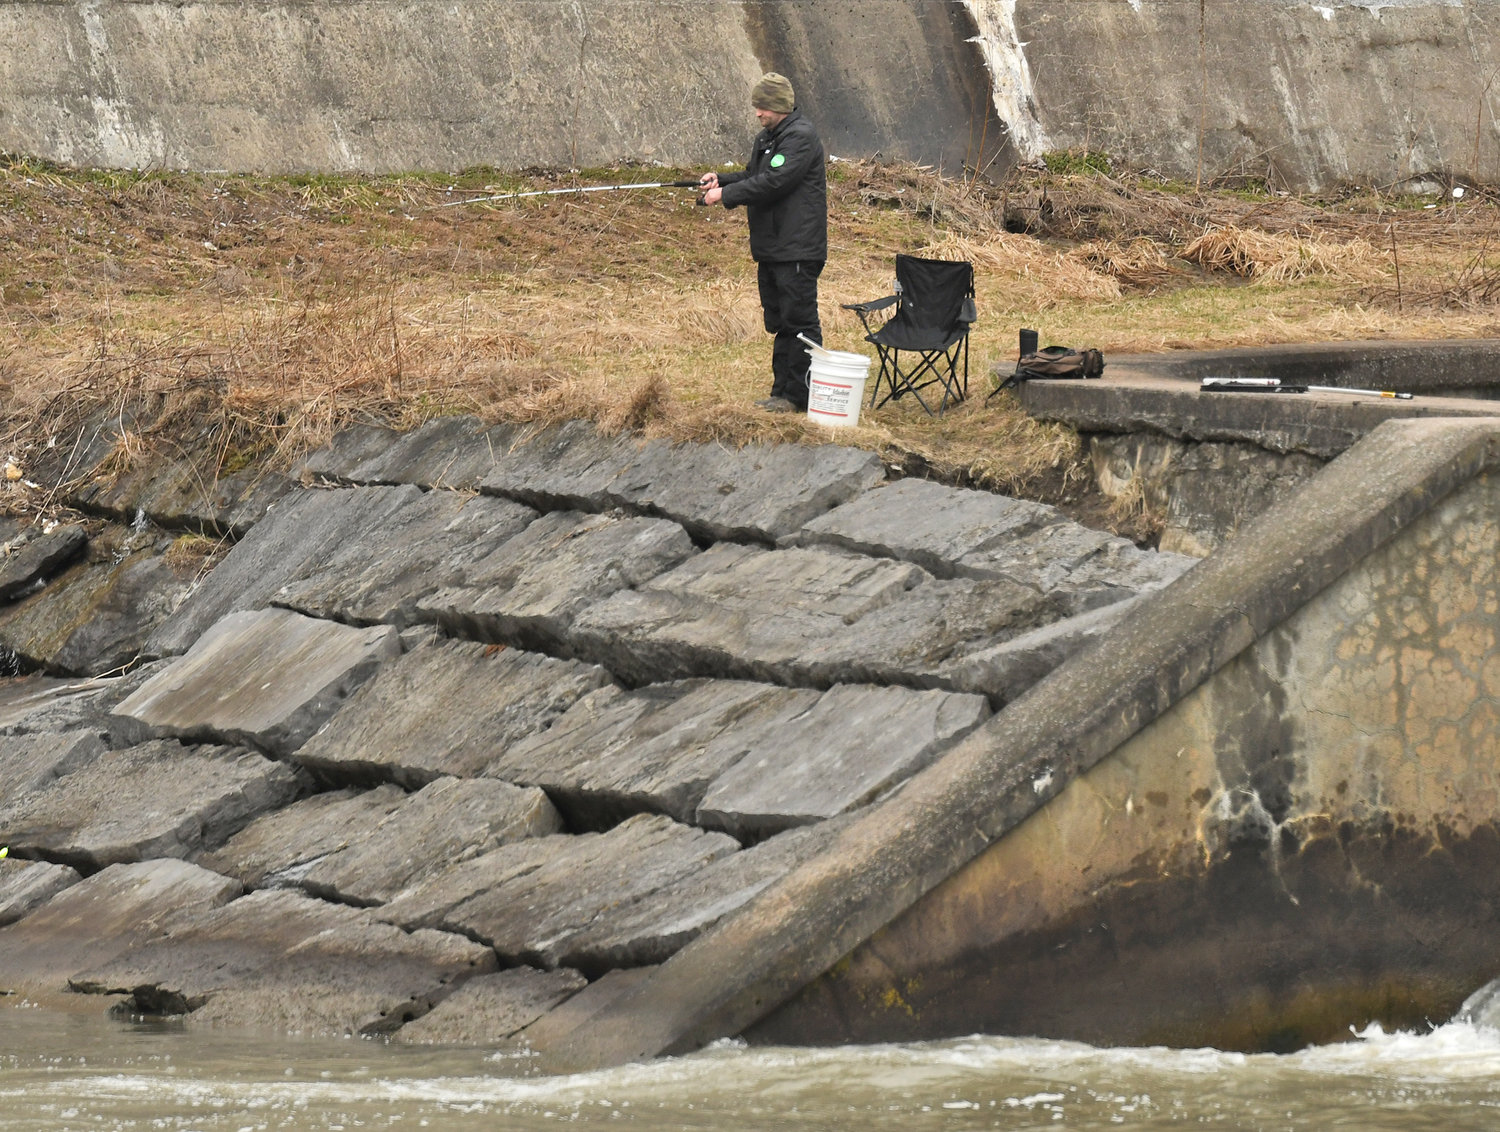 A fisherman just below Delta Dam on opening day of trout season.